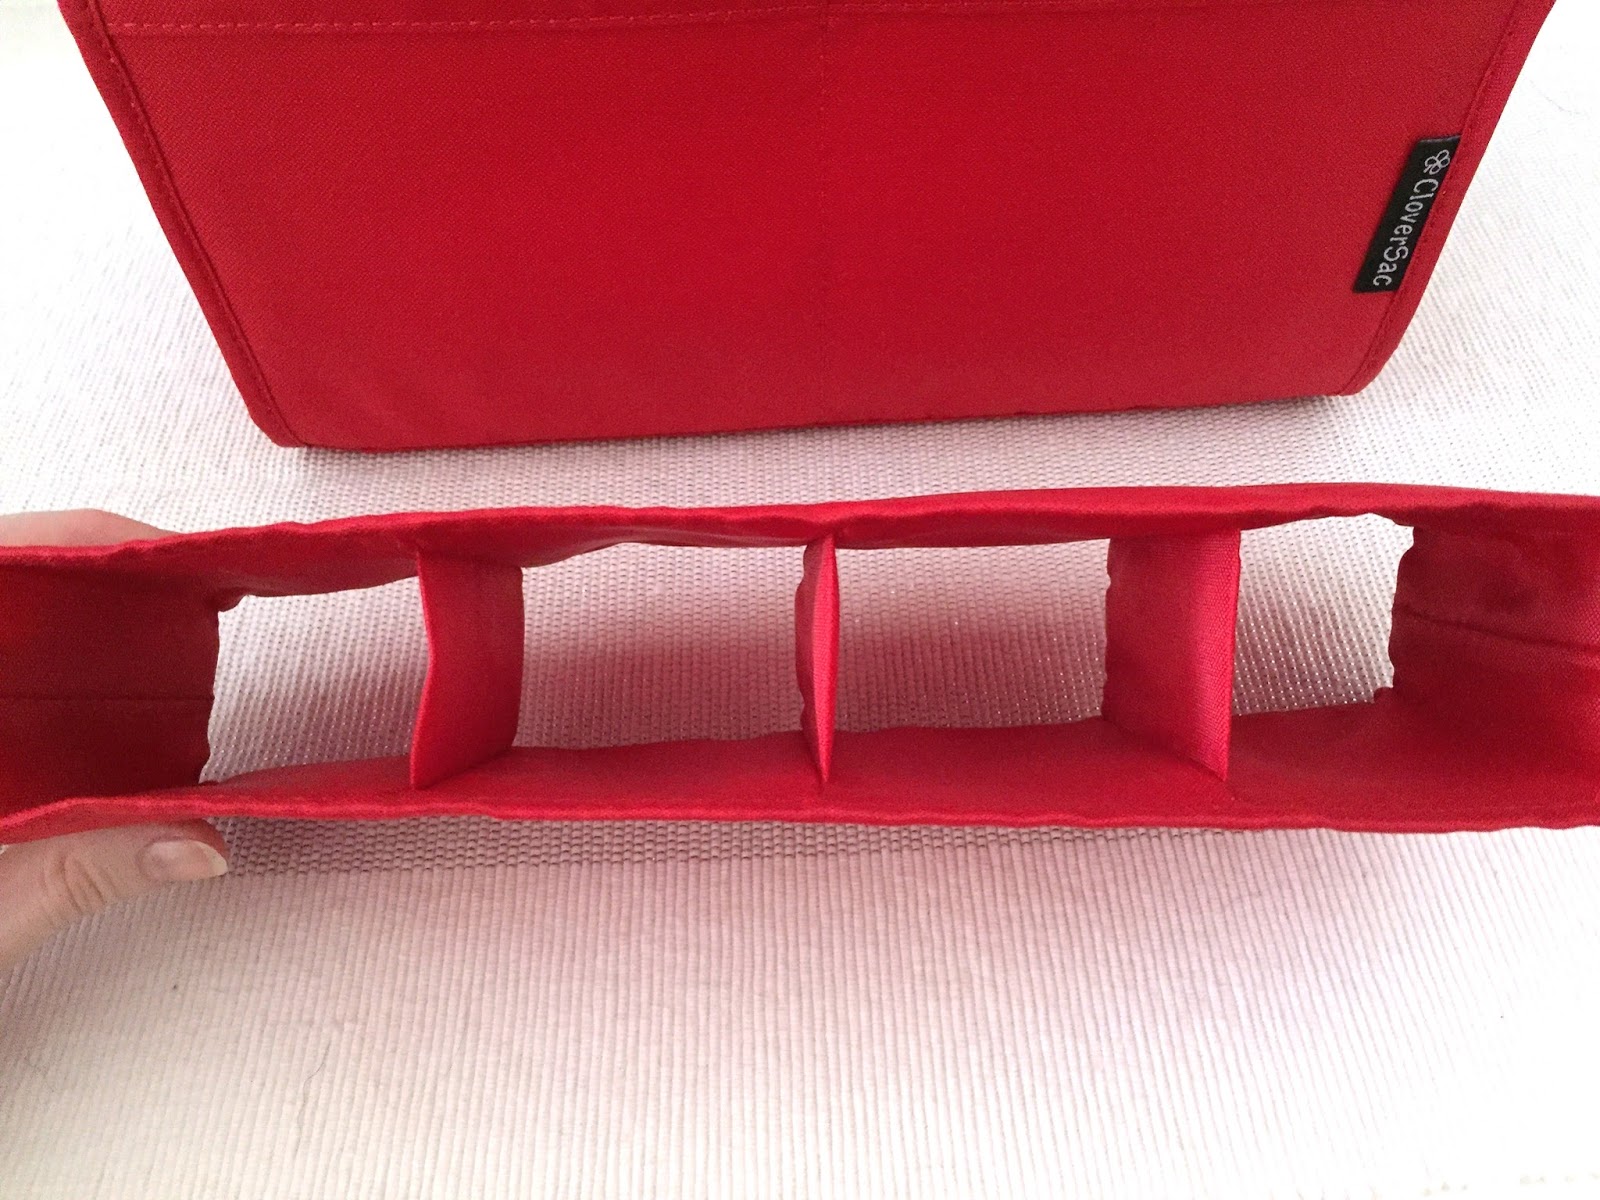 Louis Vuitton Nice Organizer Insert, Bag Organizer with Middle Compartment  and Pen Holder